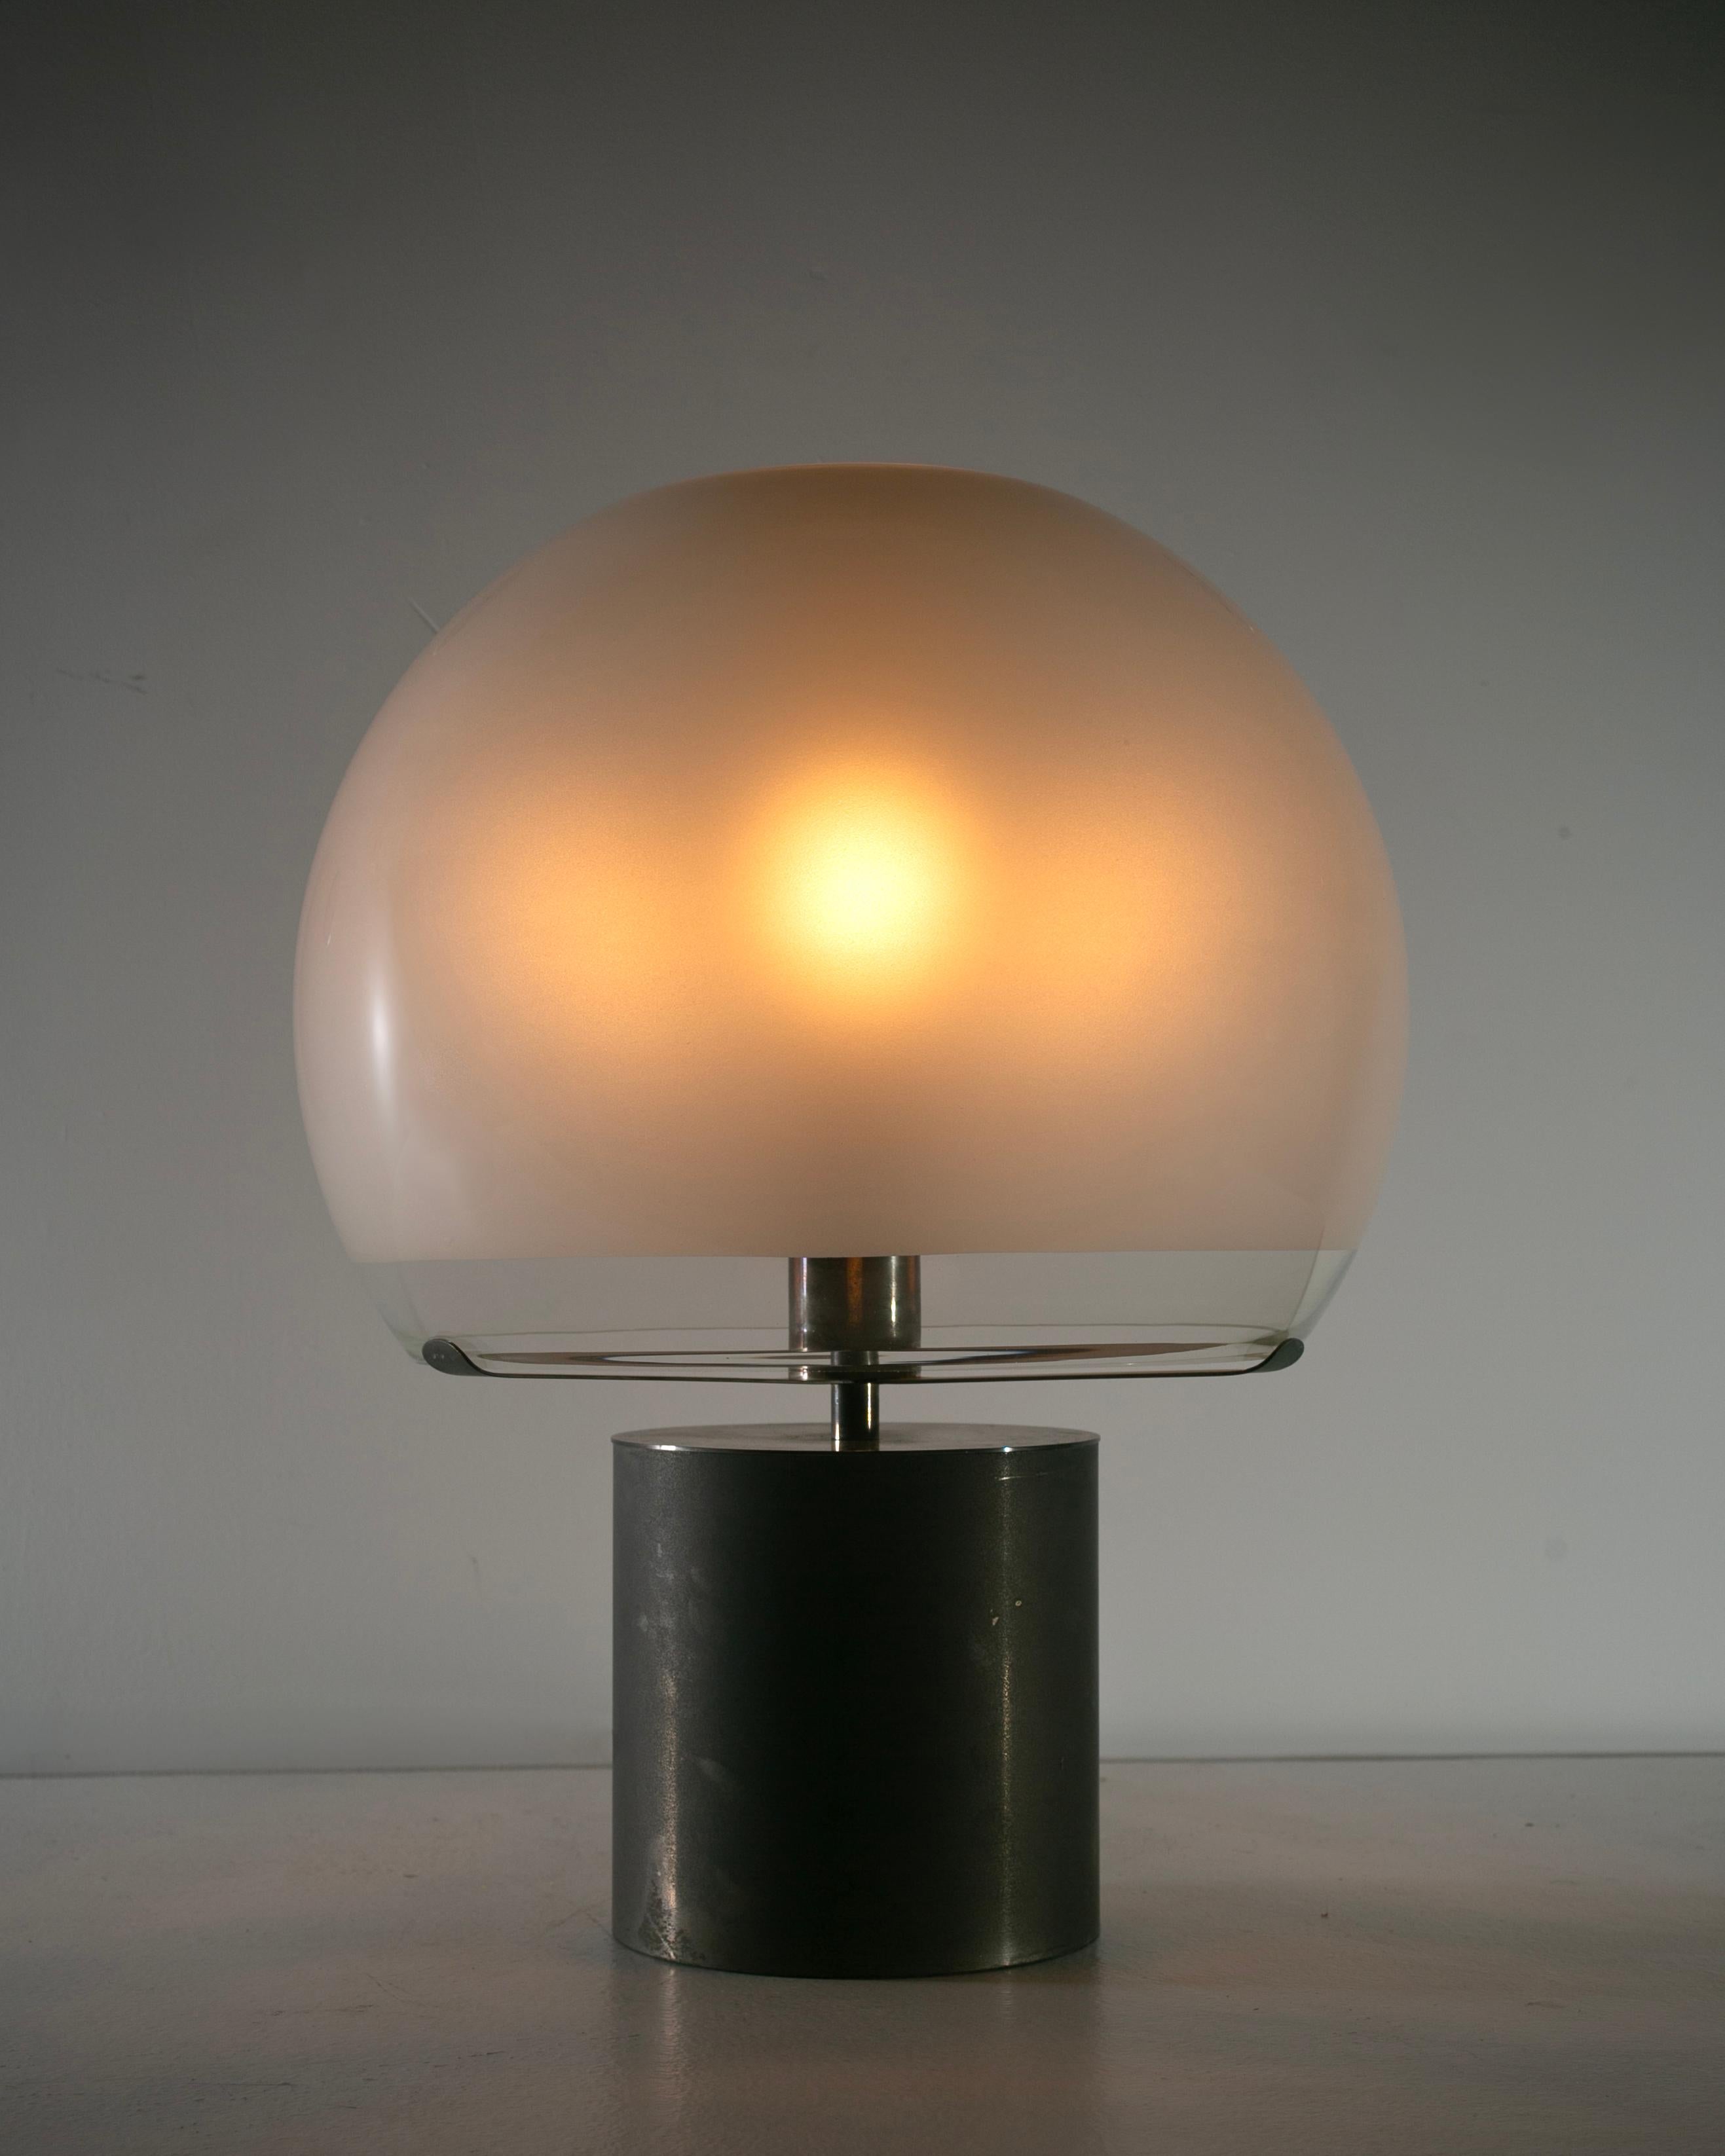 LTA6 Table Lamp by Luigi Caccia Dominioni for Azucena Designed and manufactured in Italy, in 1966. Early model LTA6 with a very worked-in patina to the blackened steel. The large lamp consists of a massive blown etched glass diffuser, featuring a